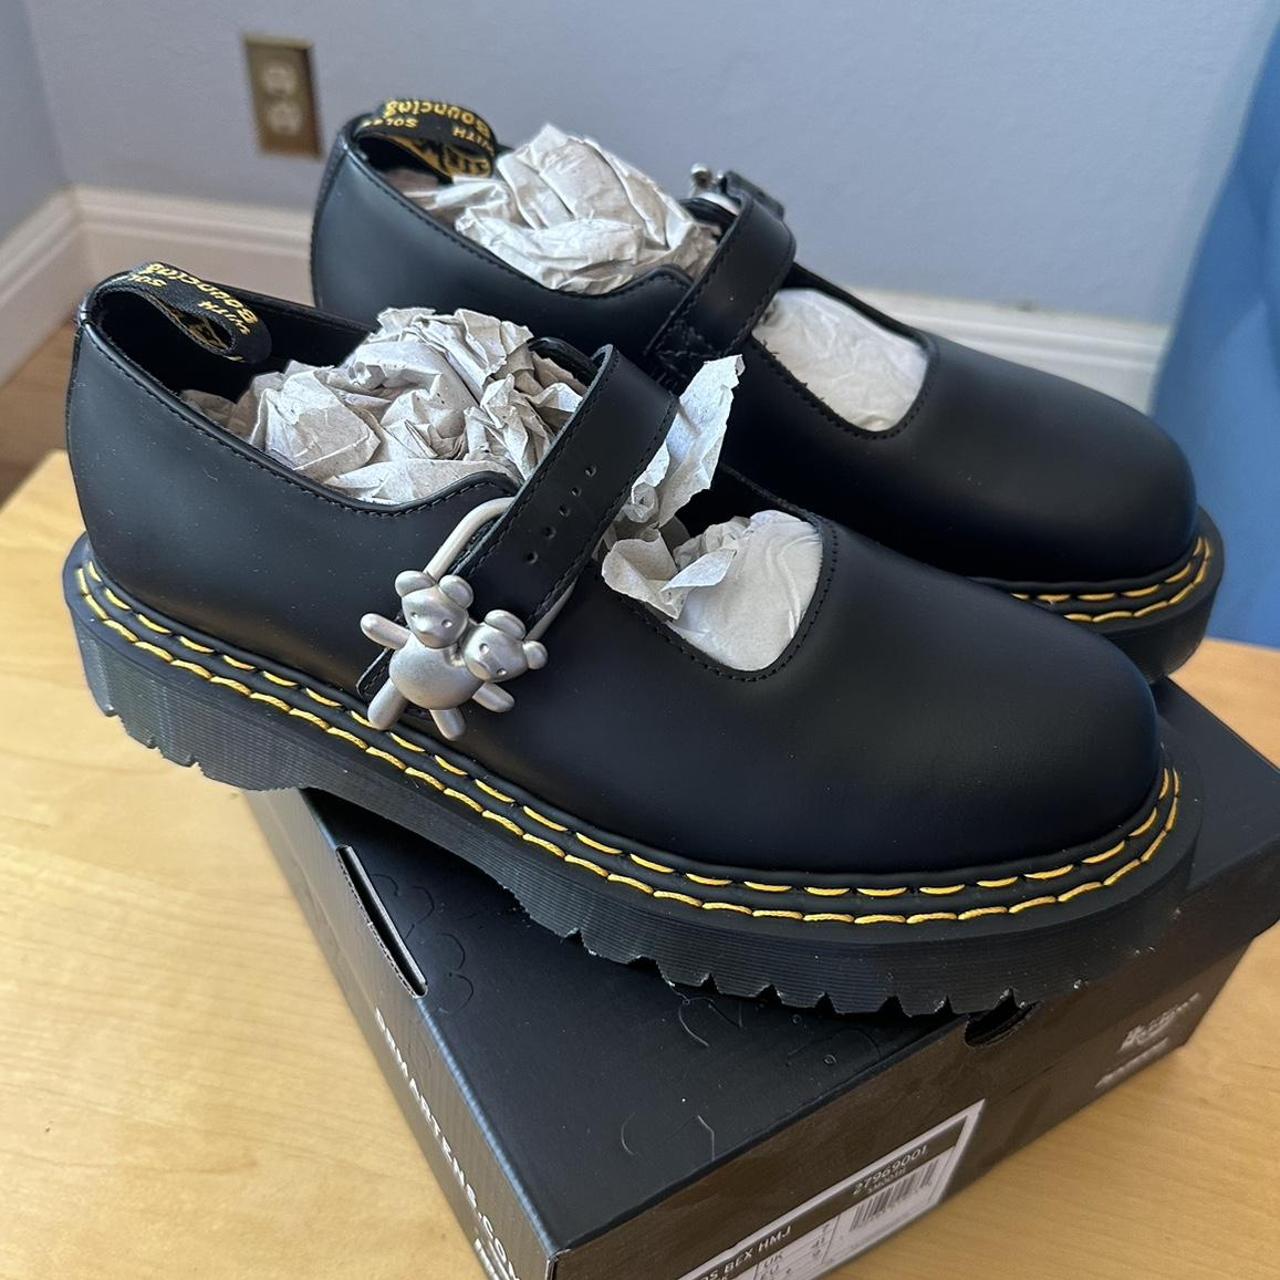 MARC JACOBS HEAVEN DR. MARTENS MARY JANES! ICONIC!... - Depop